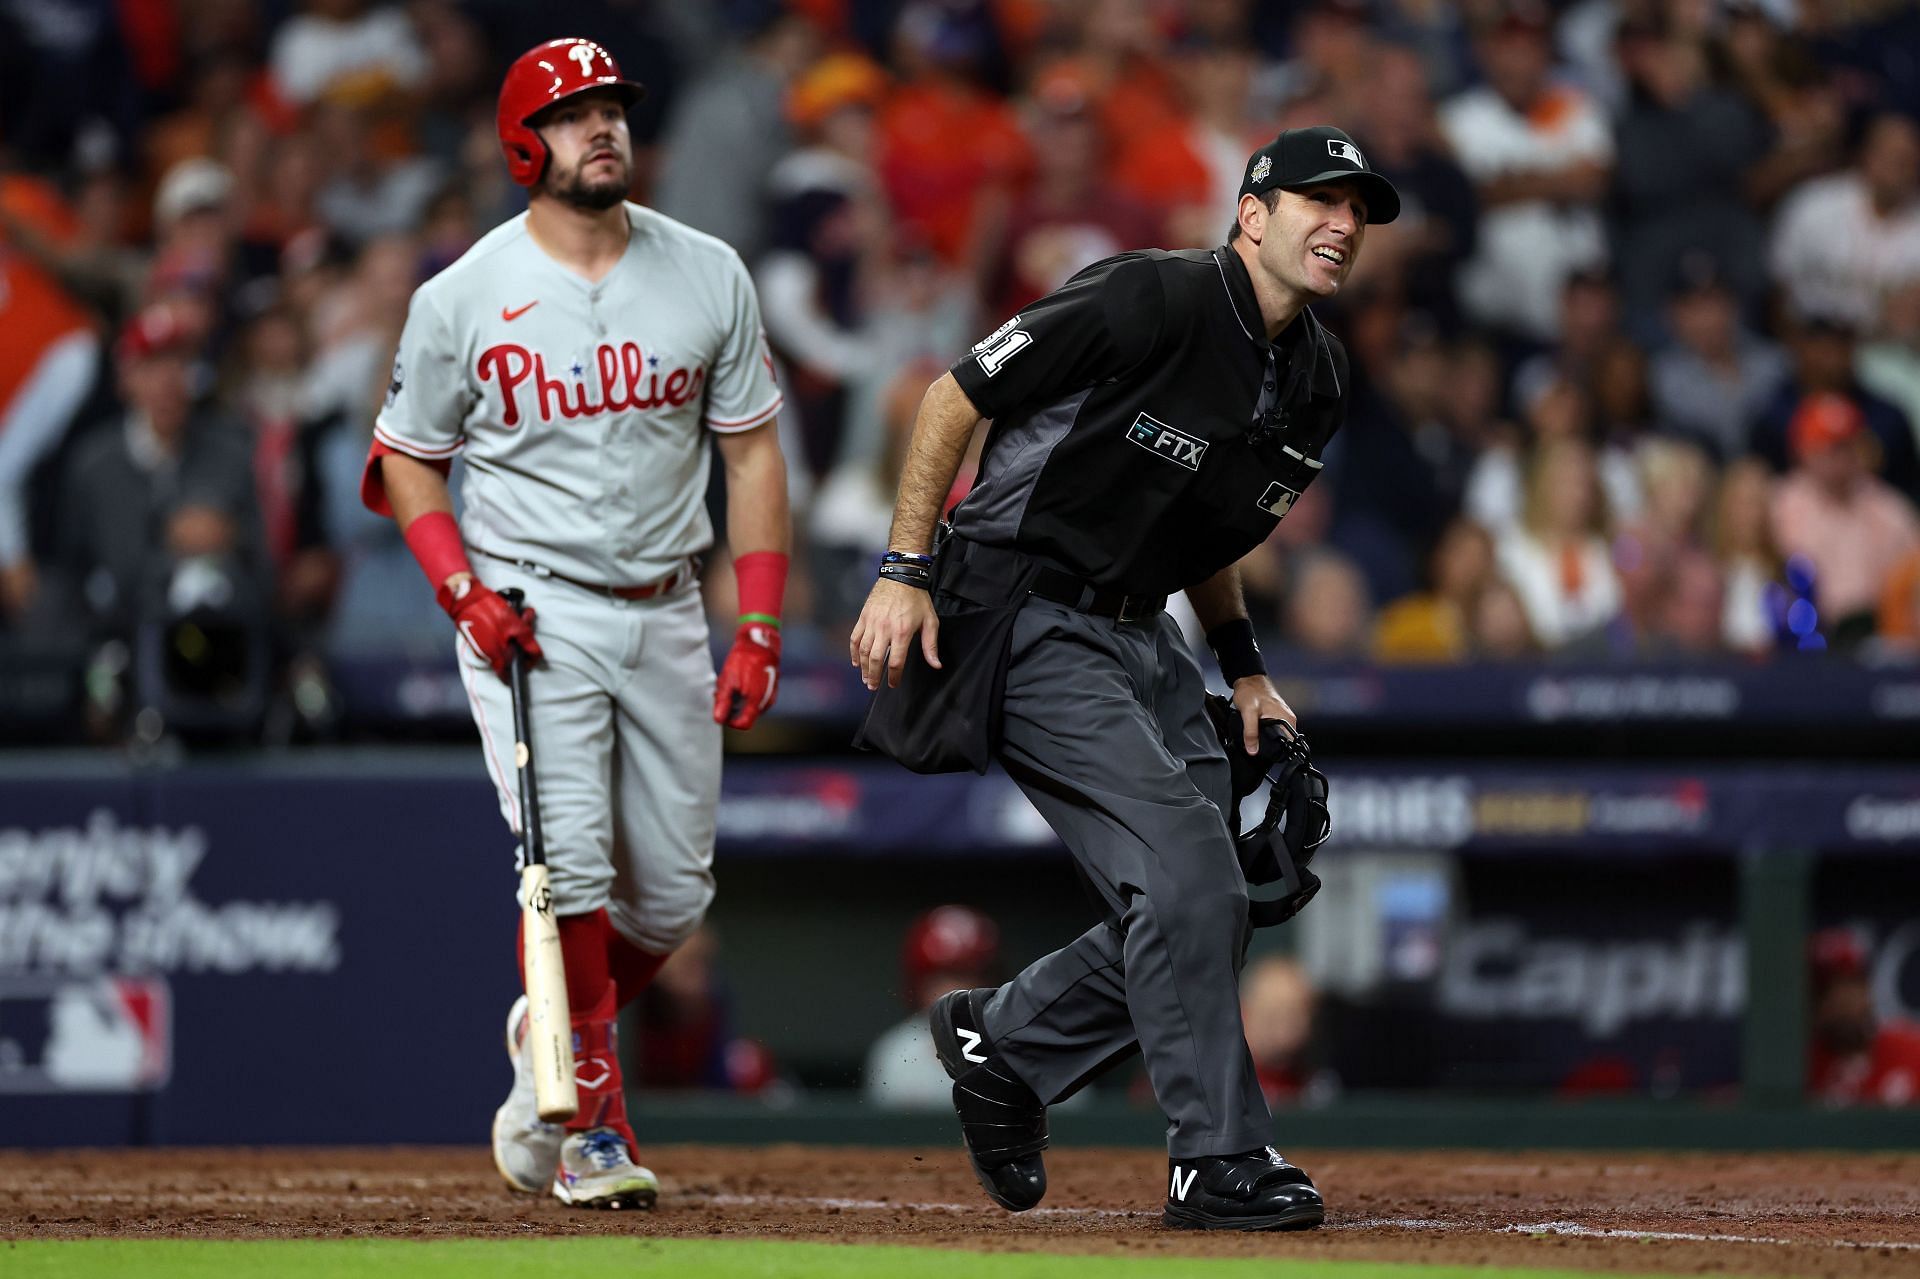 J.T. Realmuto ejected after bizarre failed ball exchange with umpire